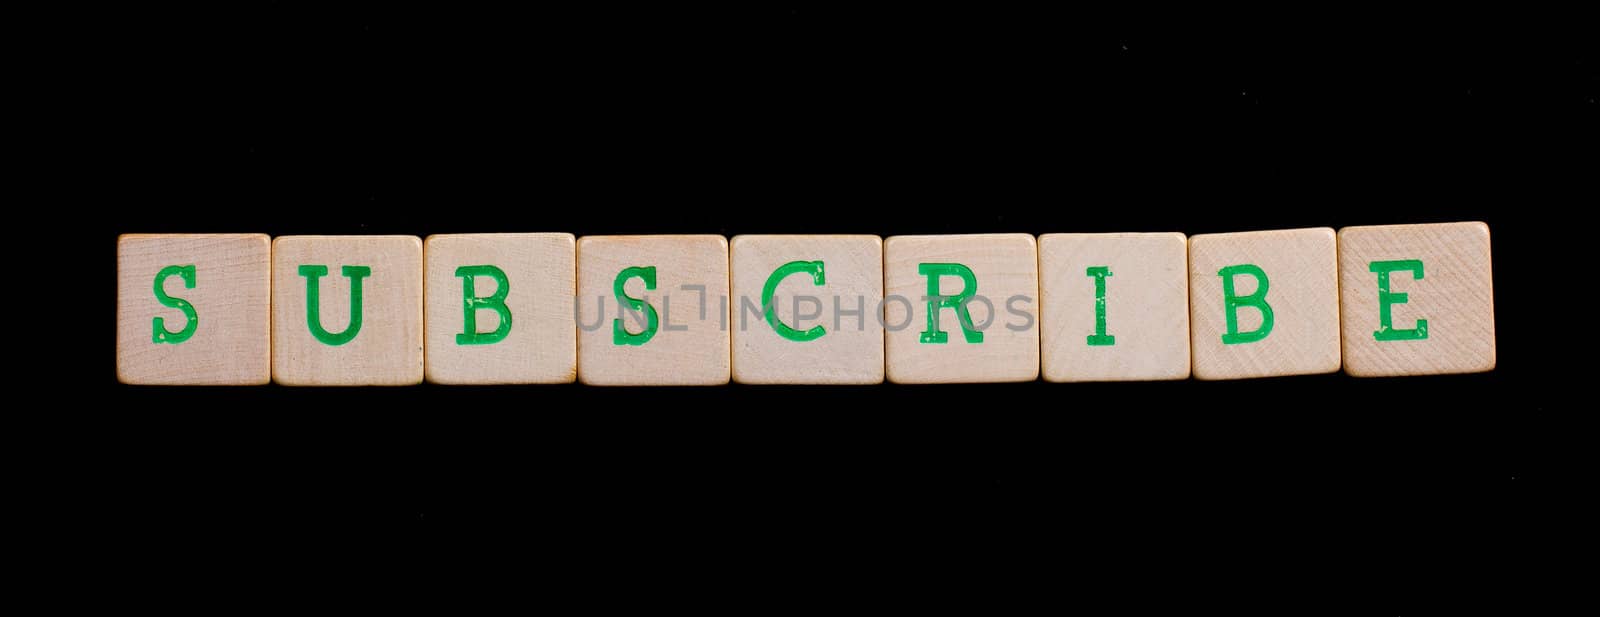 Green letters on old wooden blocks (subscribe) by michaklootwijk